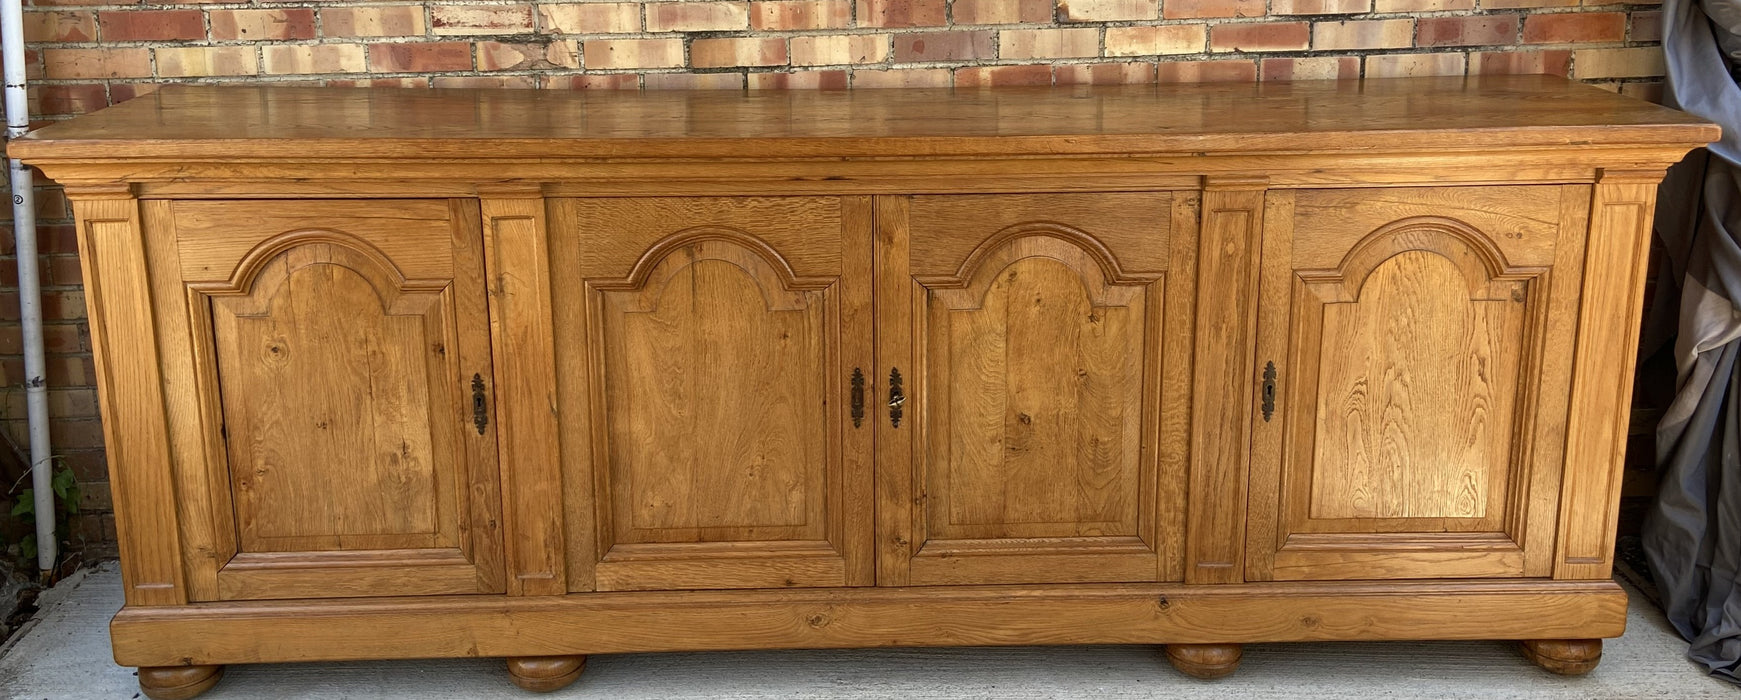 RUSTIC LIGHT OAK SIDEBOARD WITH ARCH DOORS